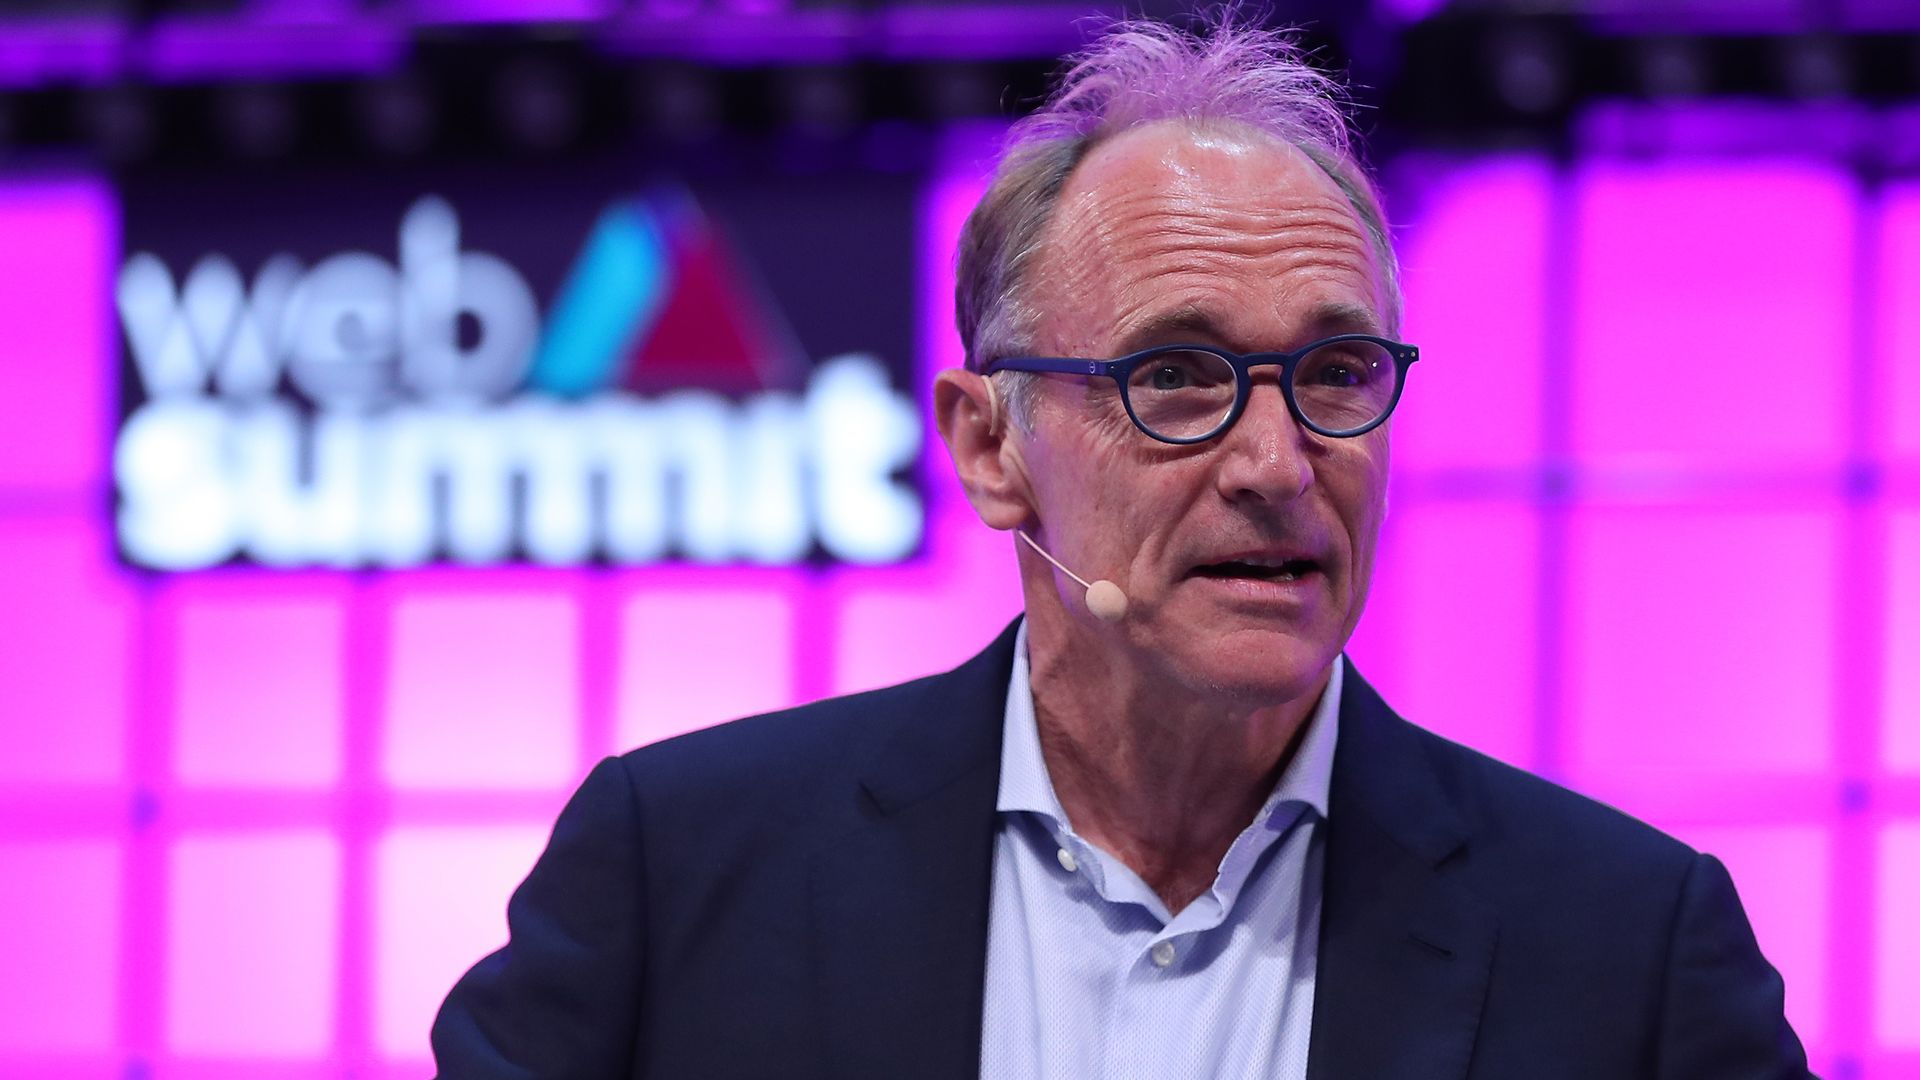 World Wide Web's Inventor and Web Foundation's Founding Director Tim Berners-Lee speaks during the Web Summit 2018 in Lisbon, Portugal on November 5, 2018. 